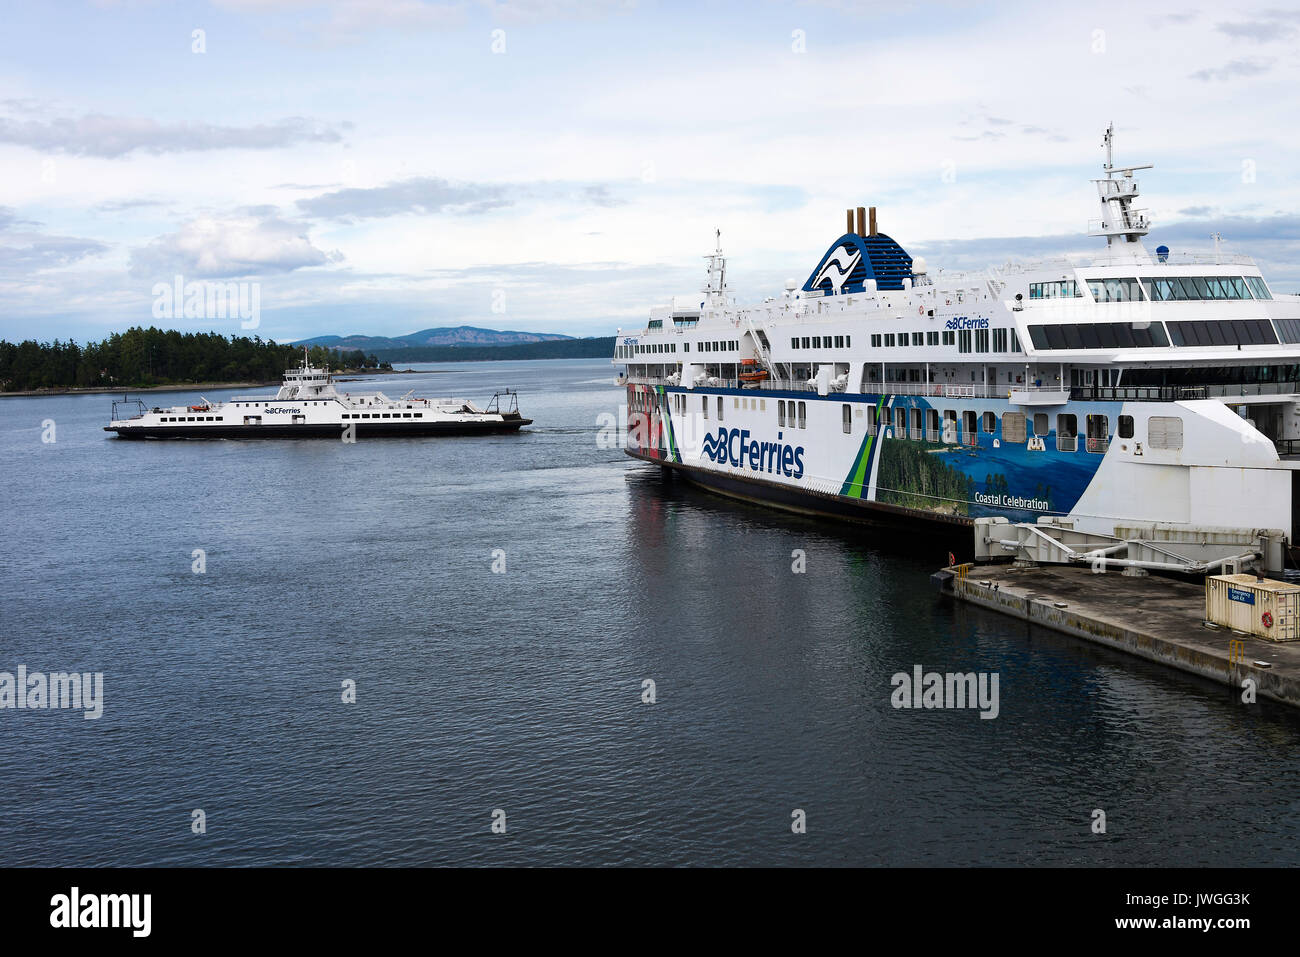 Two BC Ferries Car and Passenger Ferries MV Skeena Queen and MV Coastal Celebration at Swartz Bay Vancouver Island British Columbia Canada Stock Photo